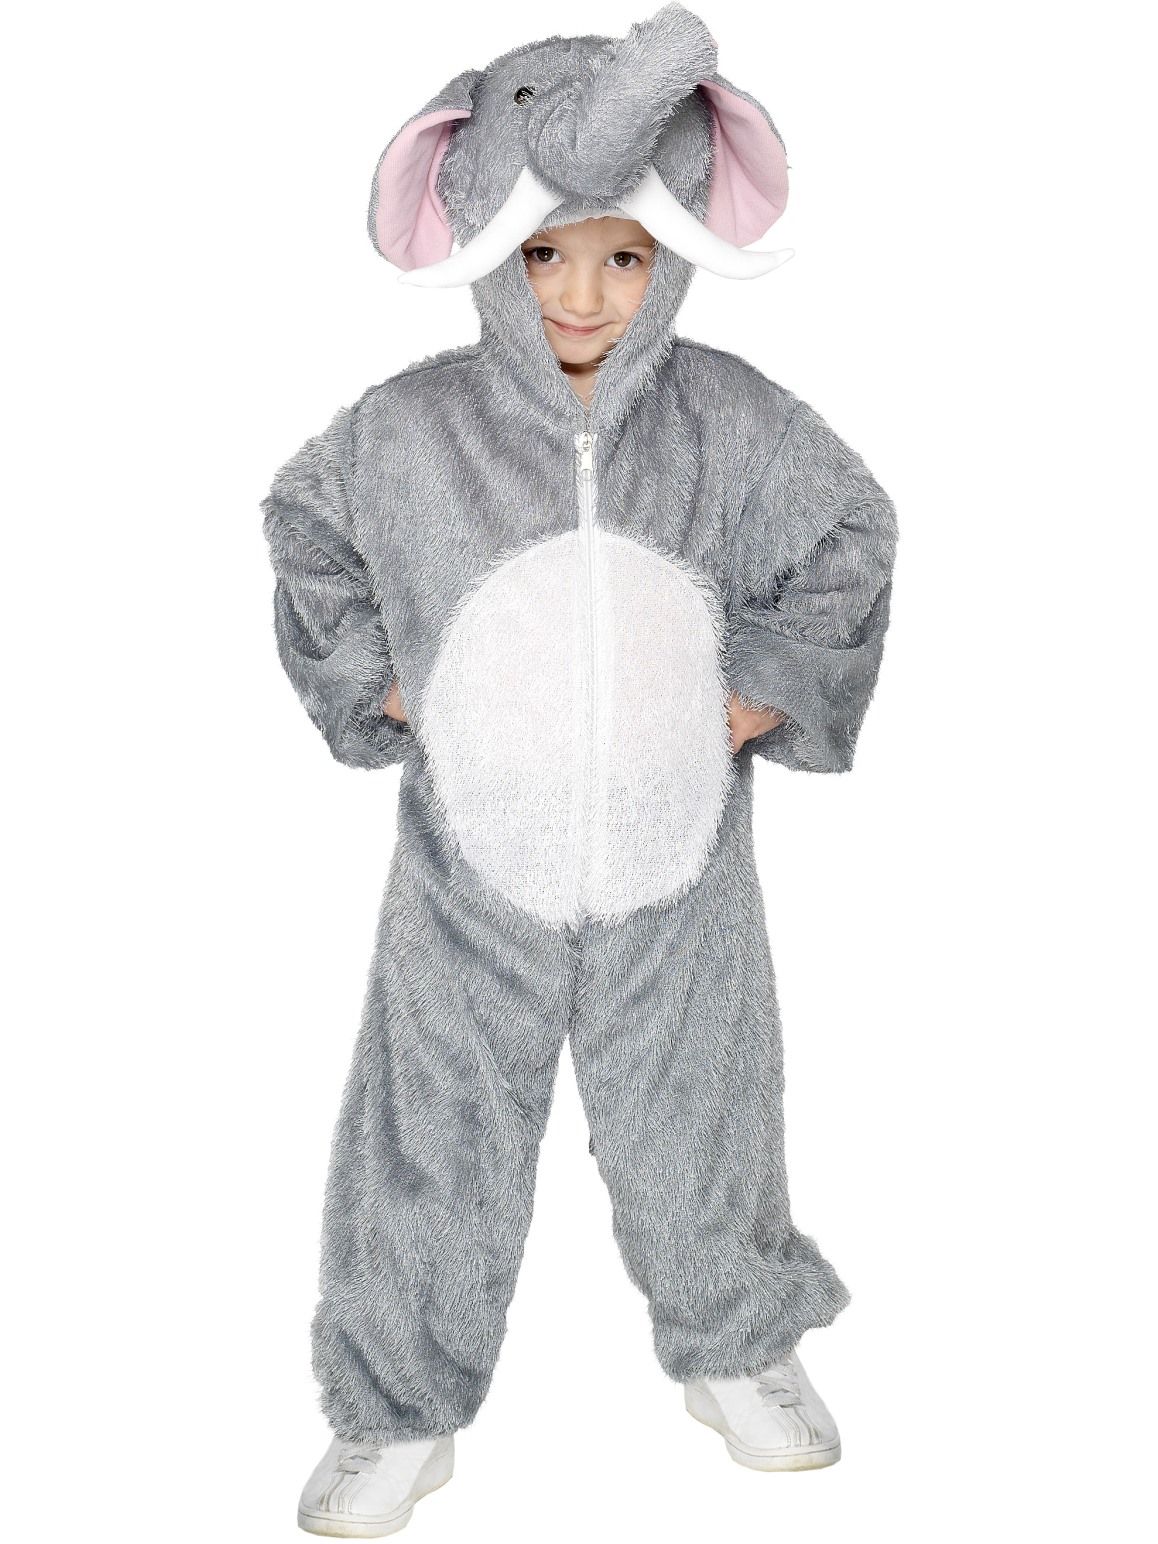 Buy or hire creature and animal costumes, Animal ears and tails.